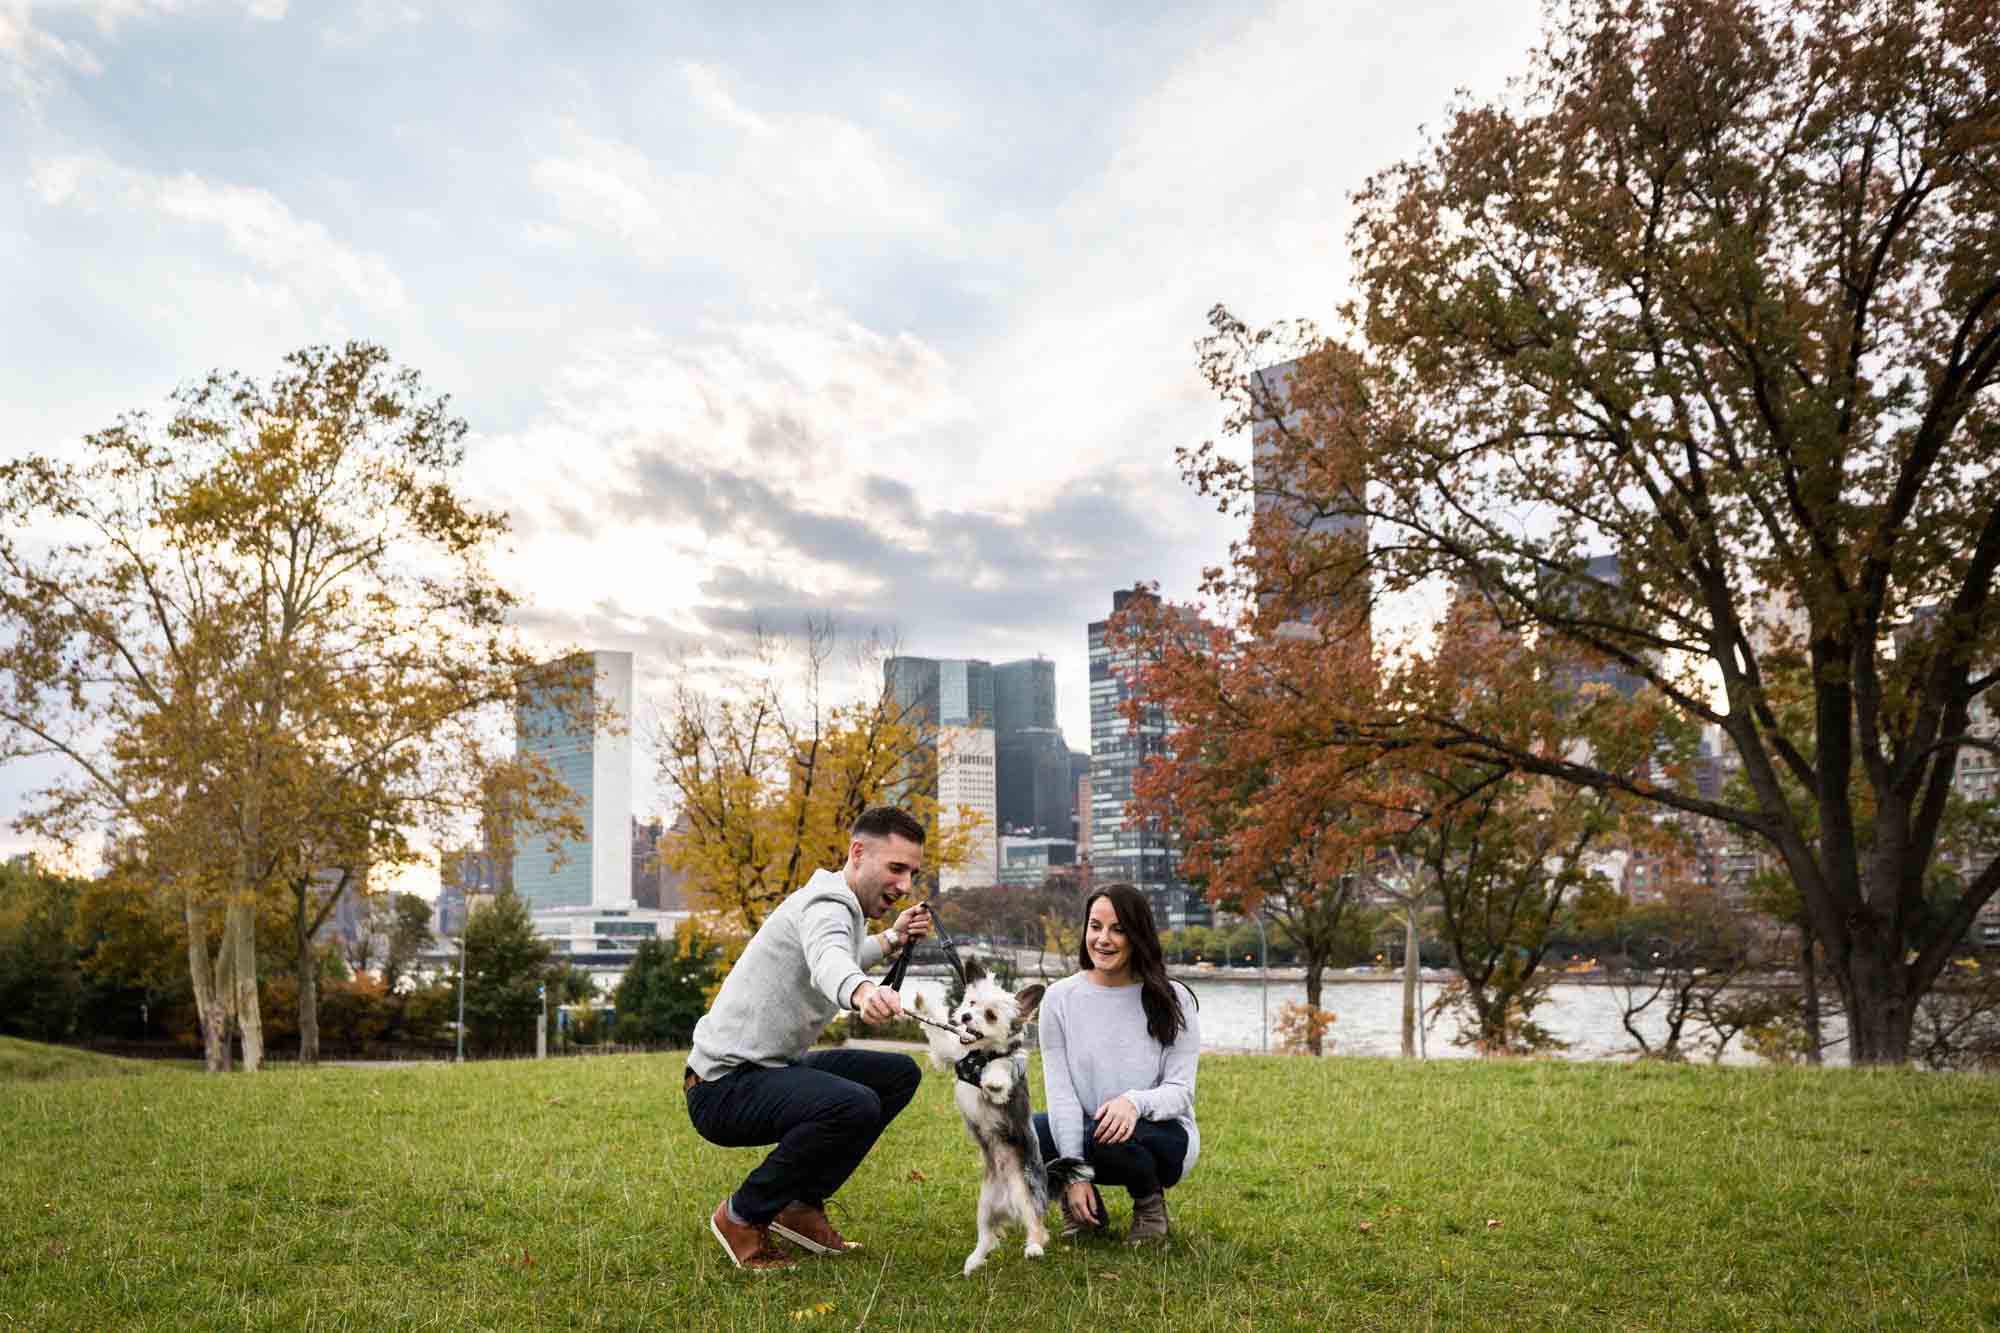 Couple playing with dog on grass for an article on pet engagement photo tips